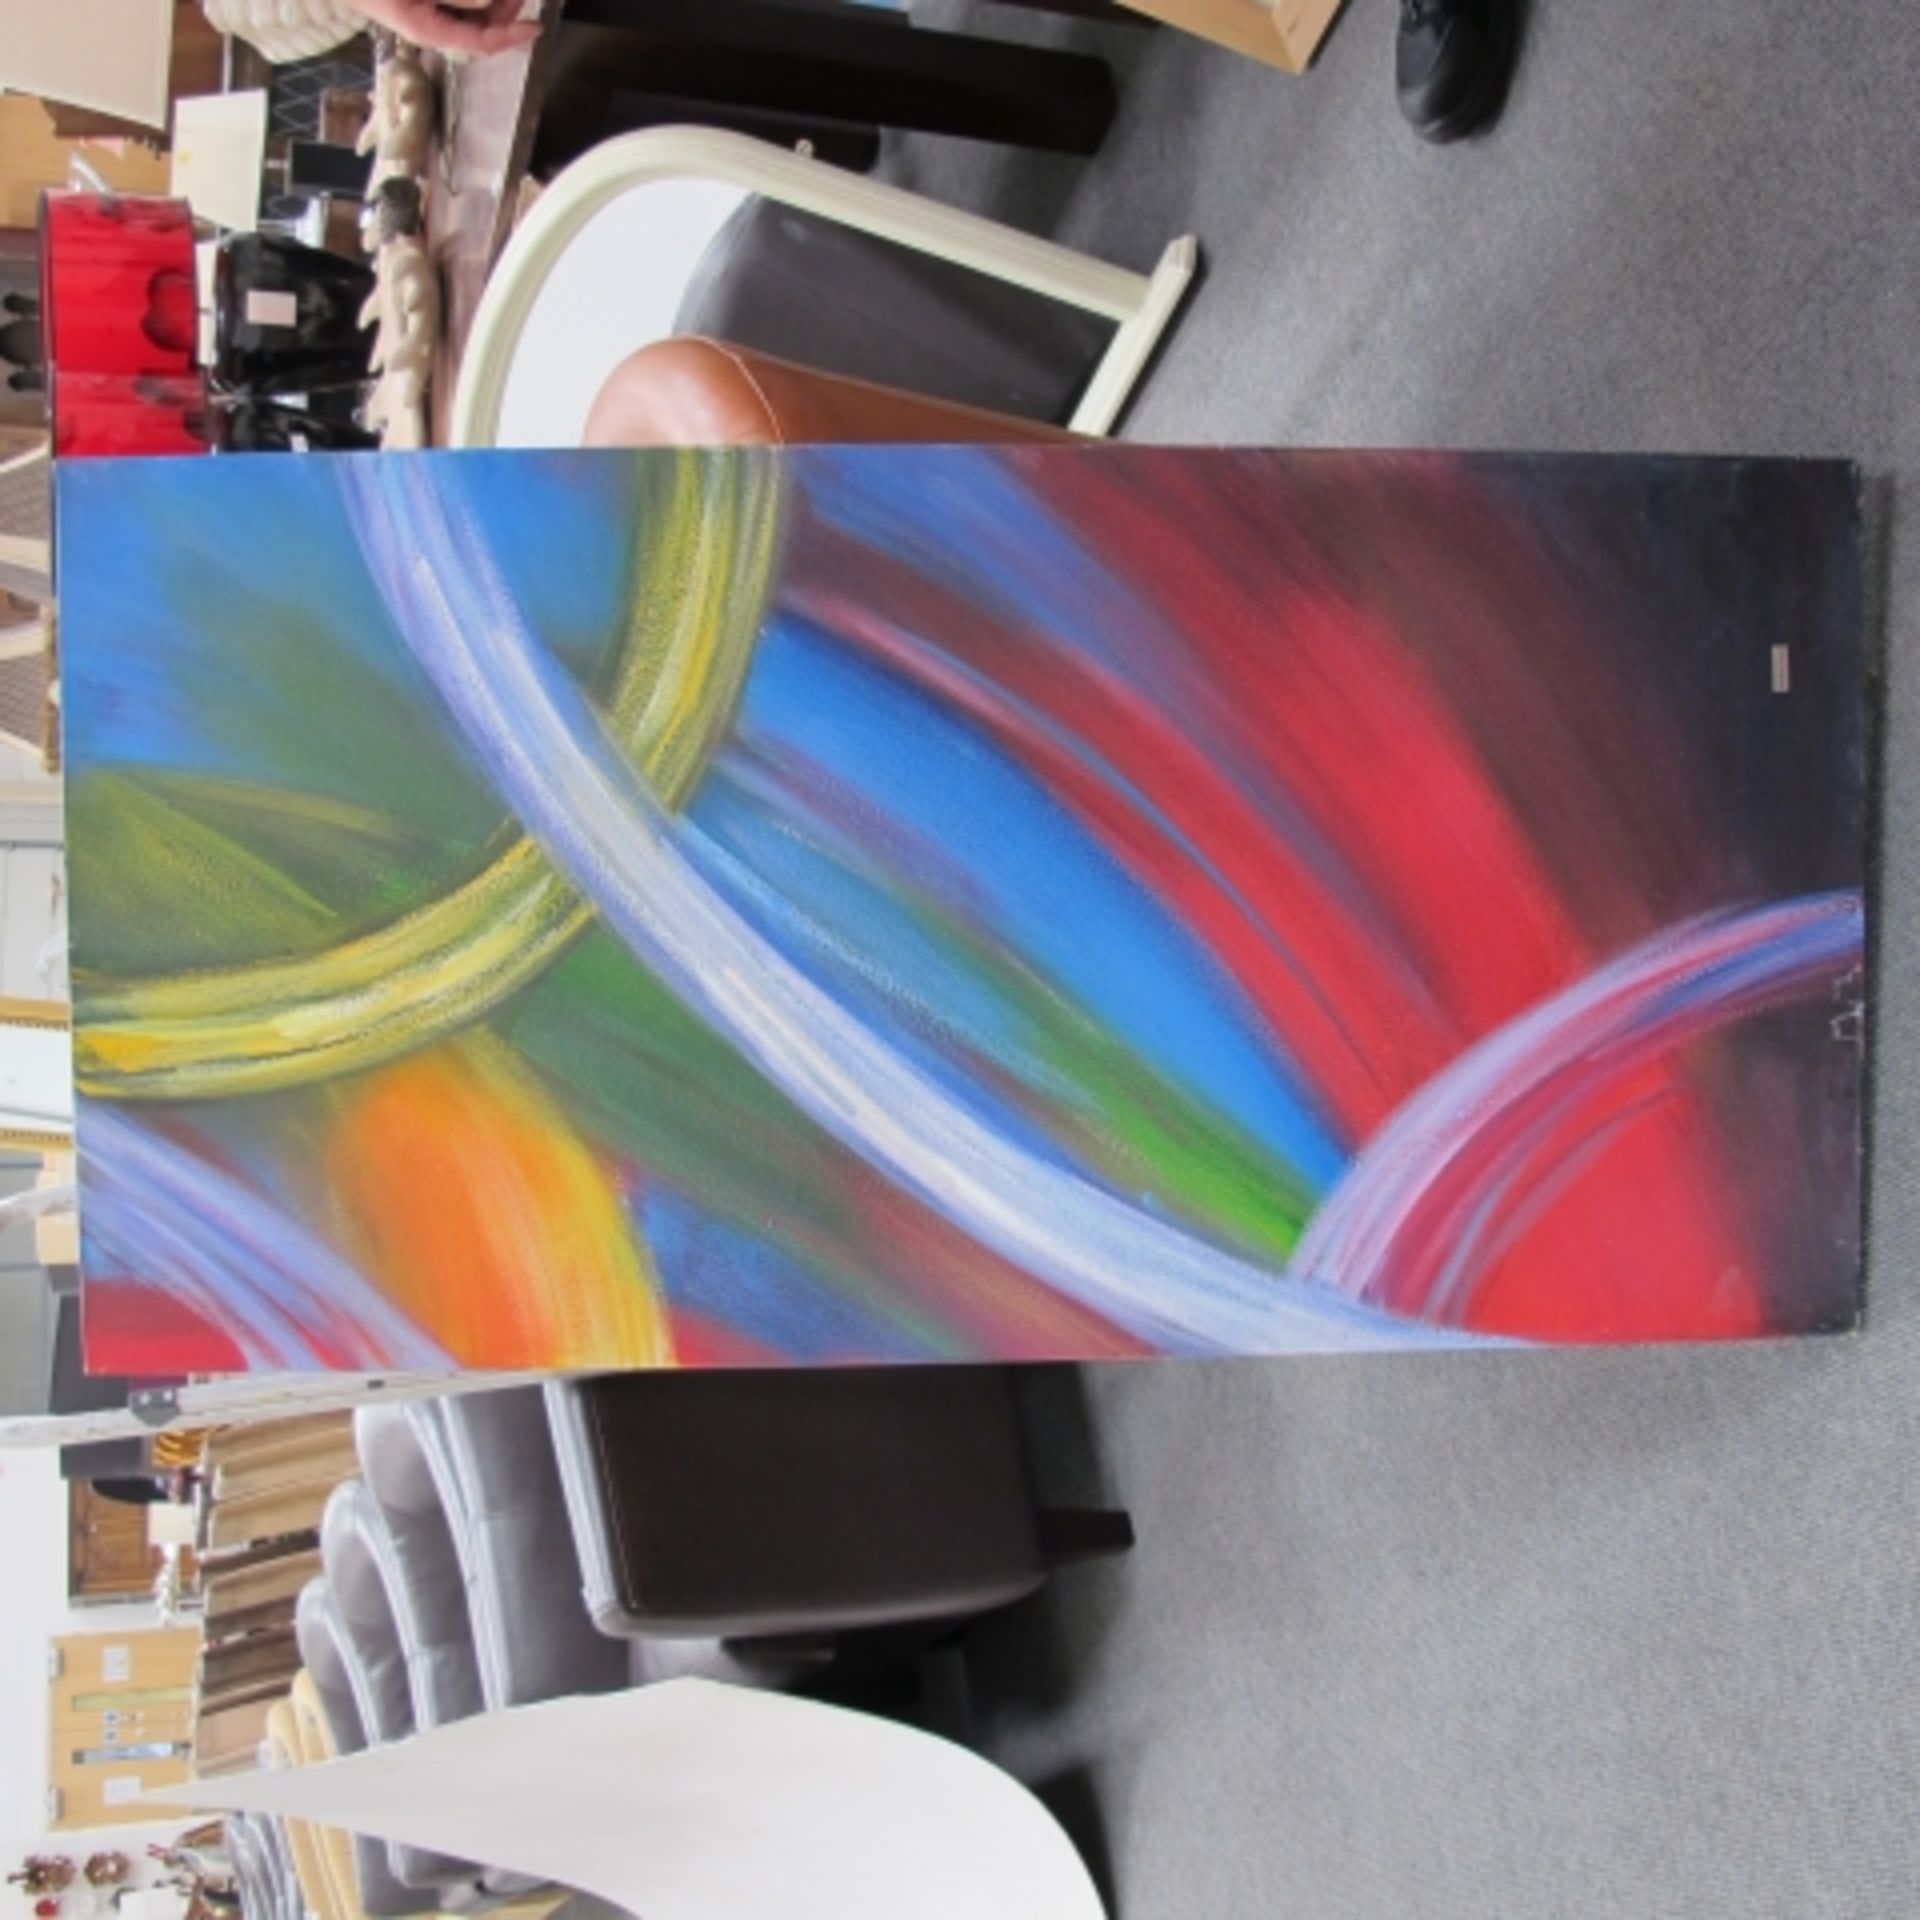 Collection of five unframed abstract oil paintings by Rachel Jack Ltd Artists (est. £20-£40) - Image 5 of 6